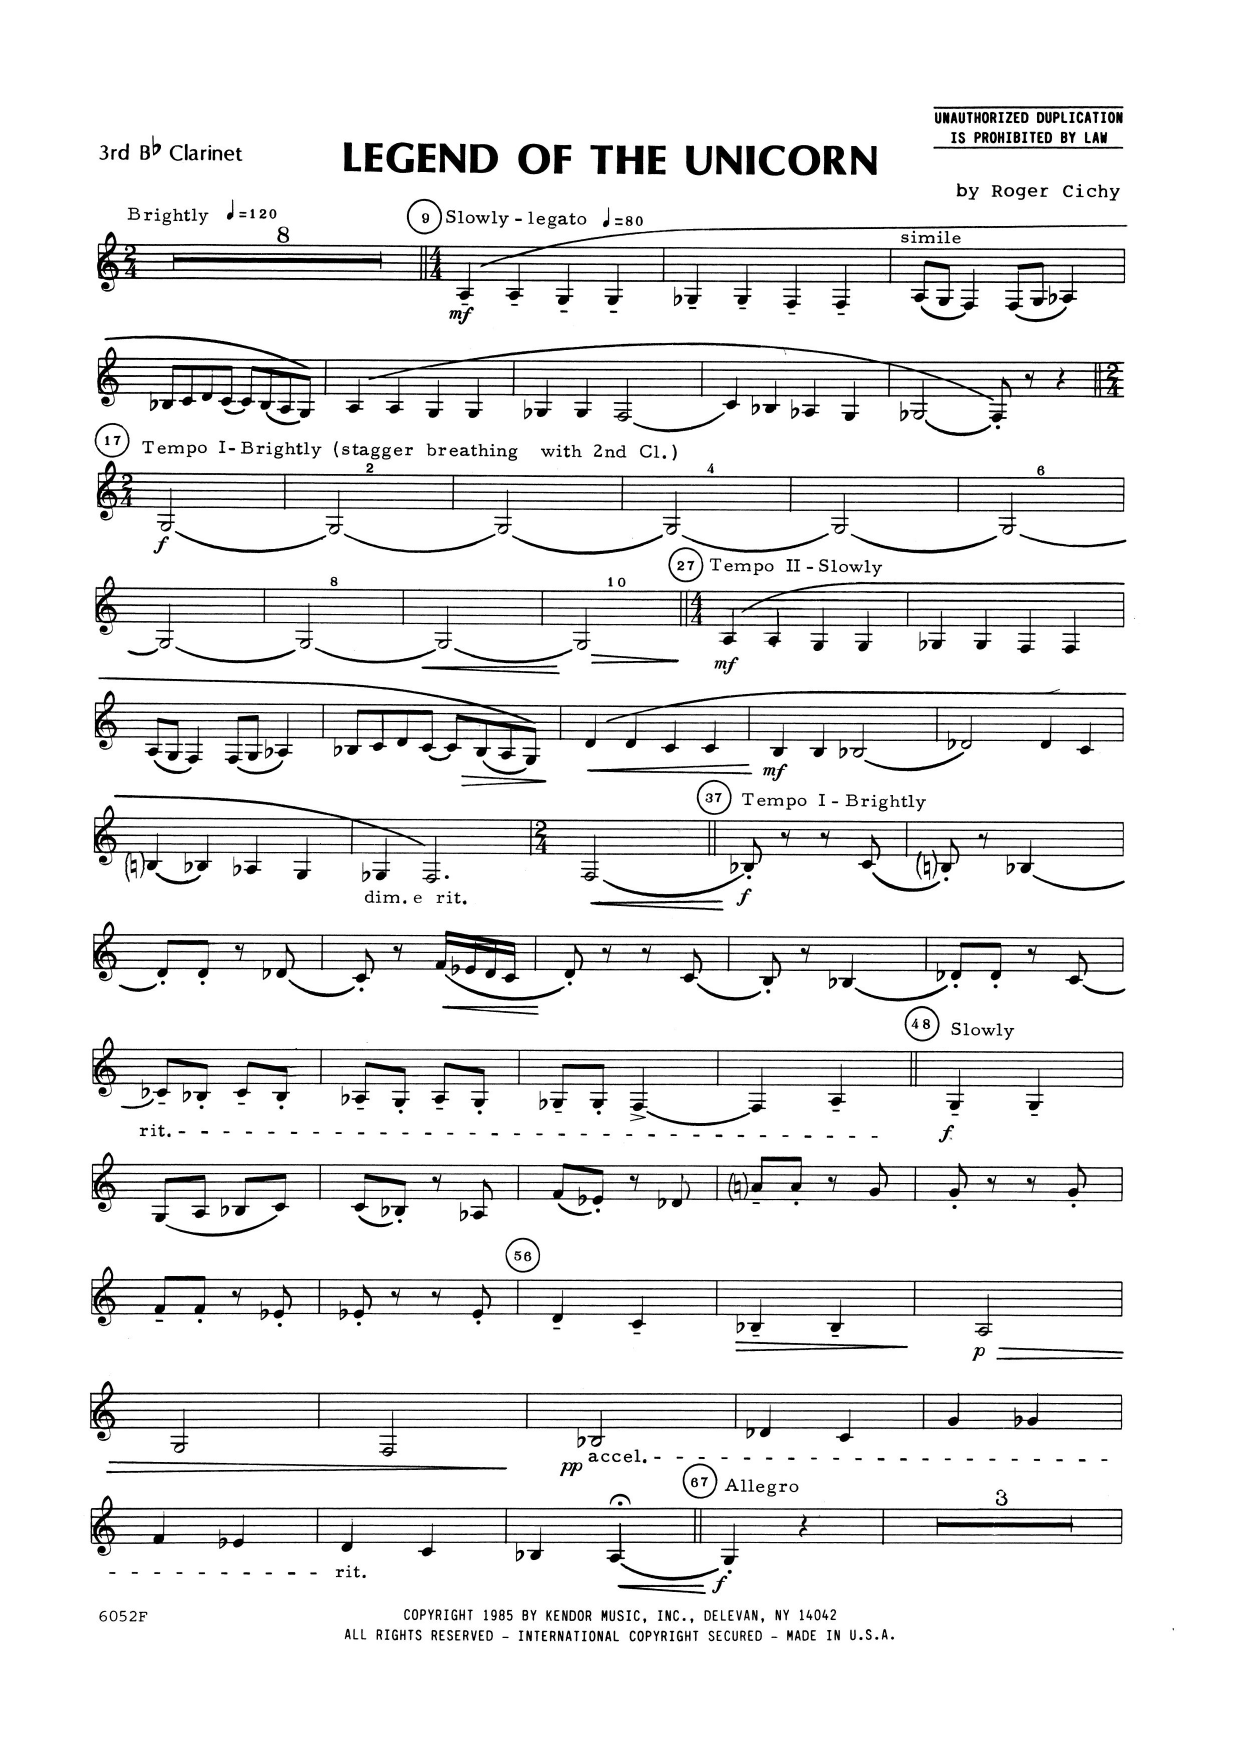 Download Roger Cichy Legend Of The Unicorn - 3rd Bb Clarinet Sheet Music